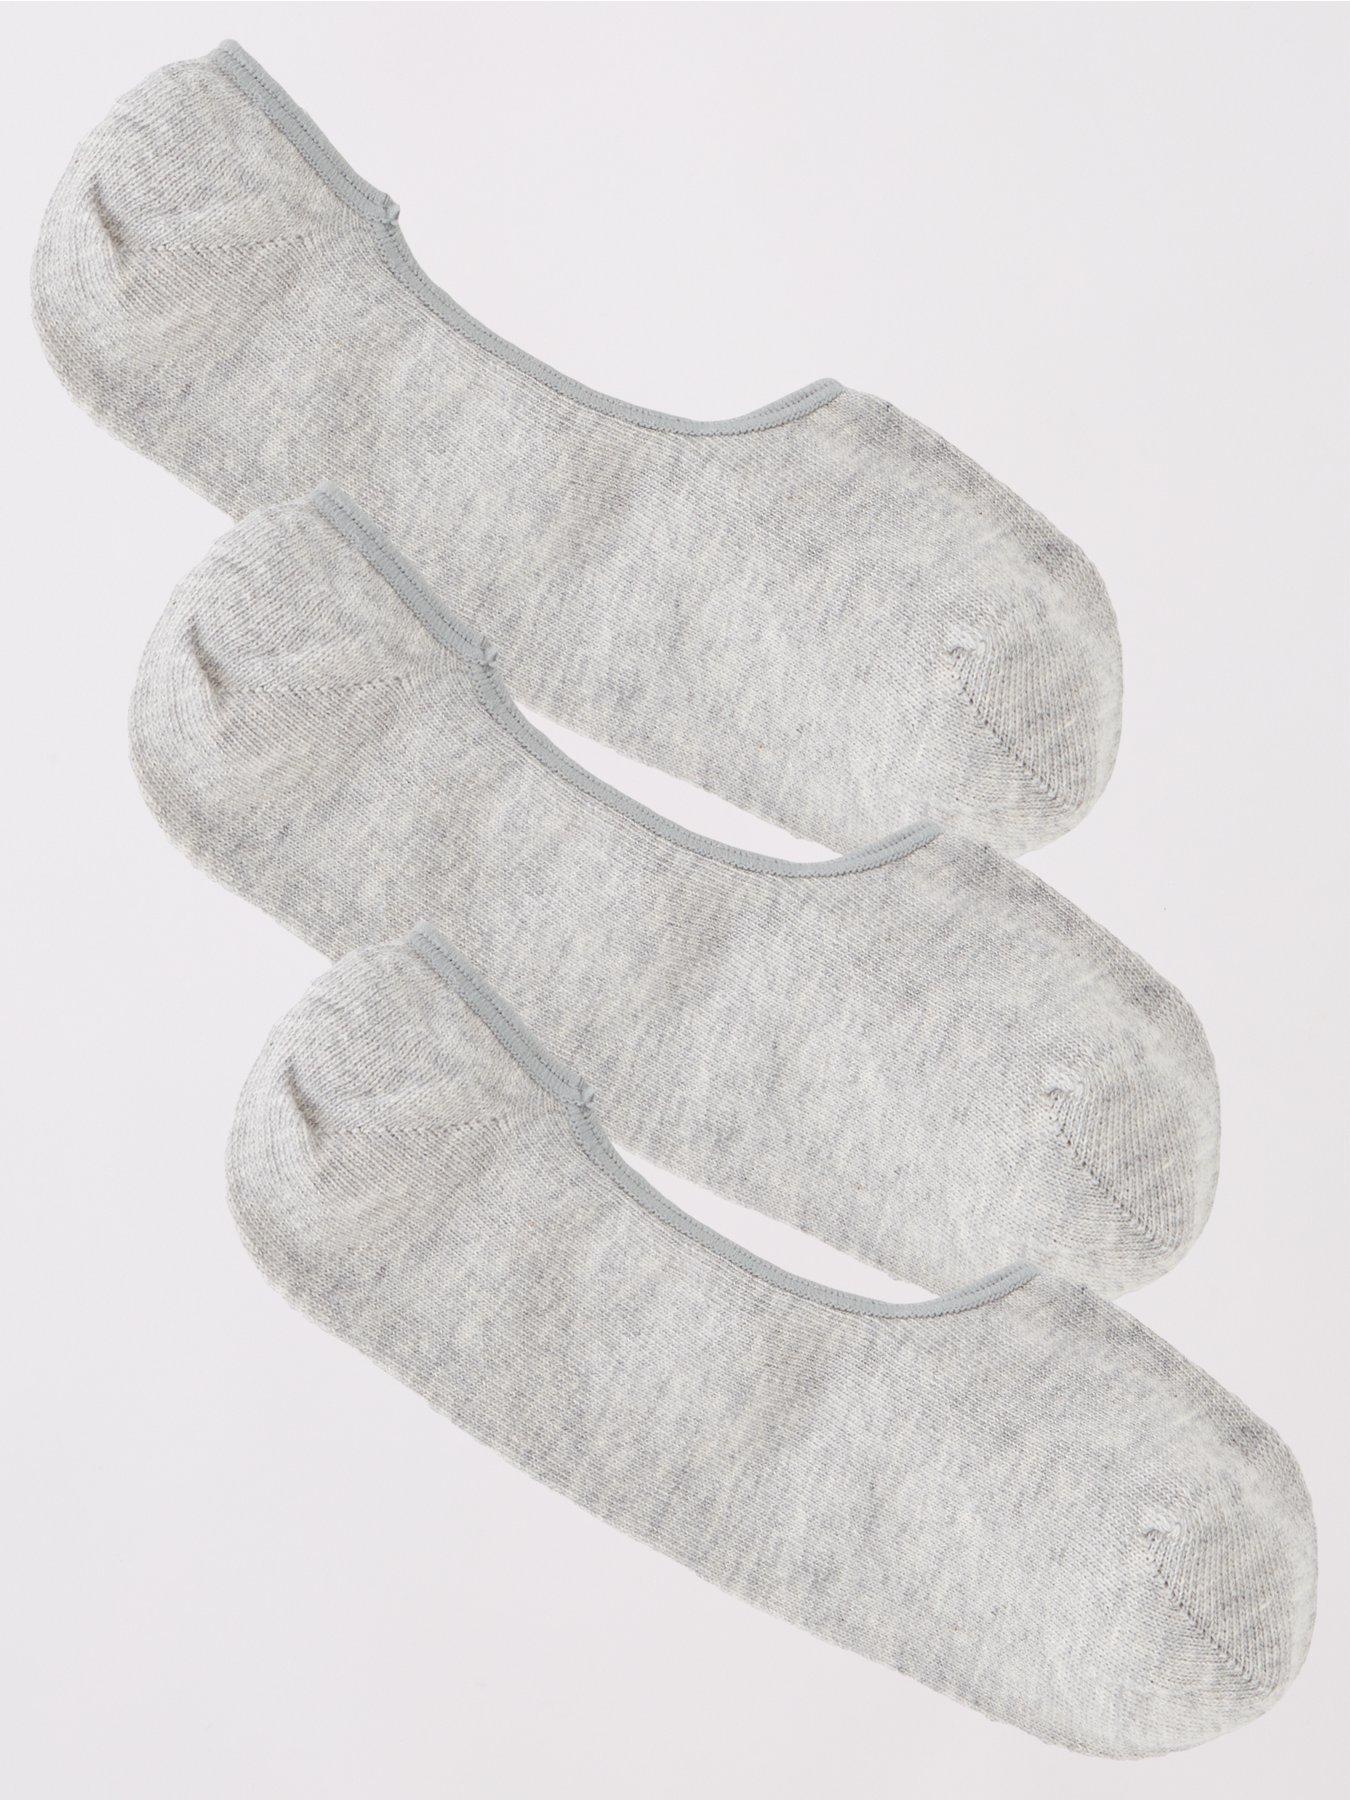 Everyday 3 Pack Invisible Trainer Liner Socks With Heel Grips - Grey